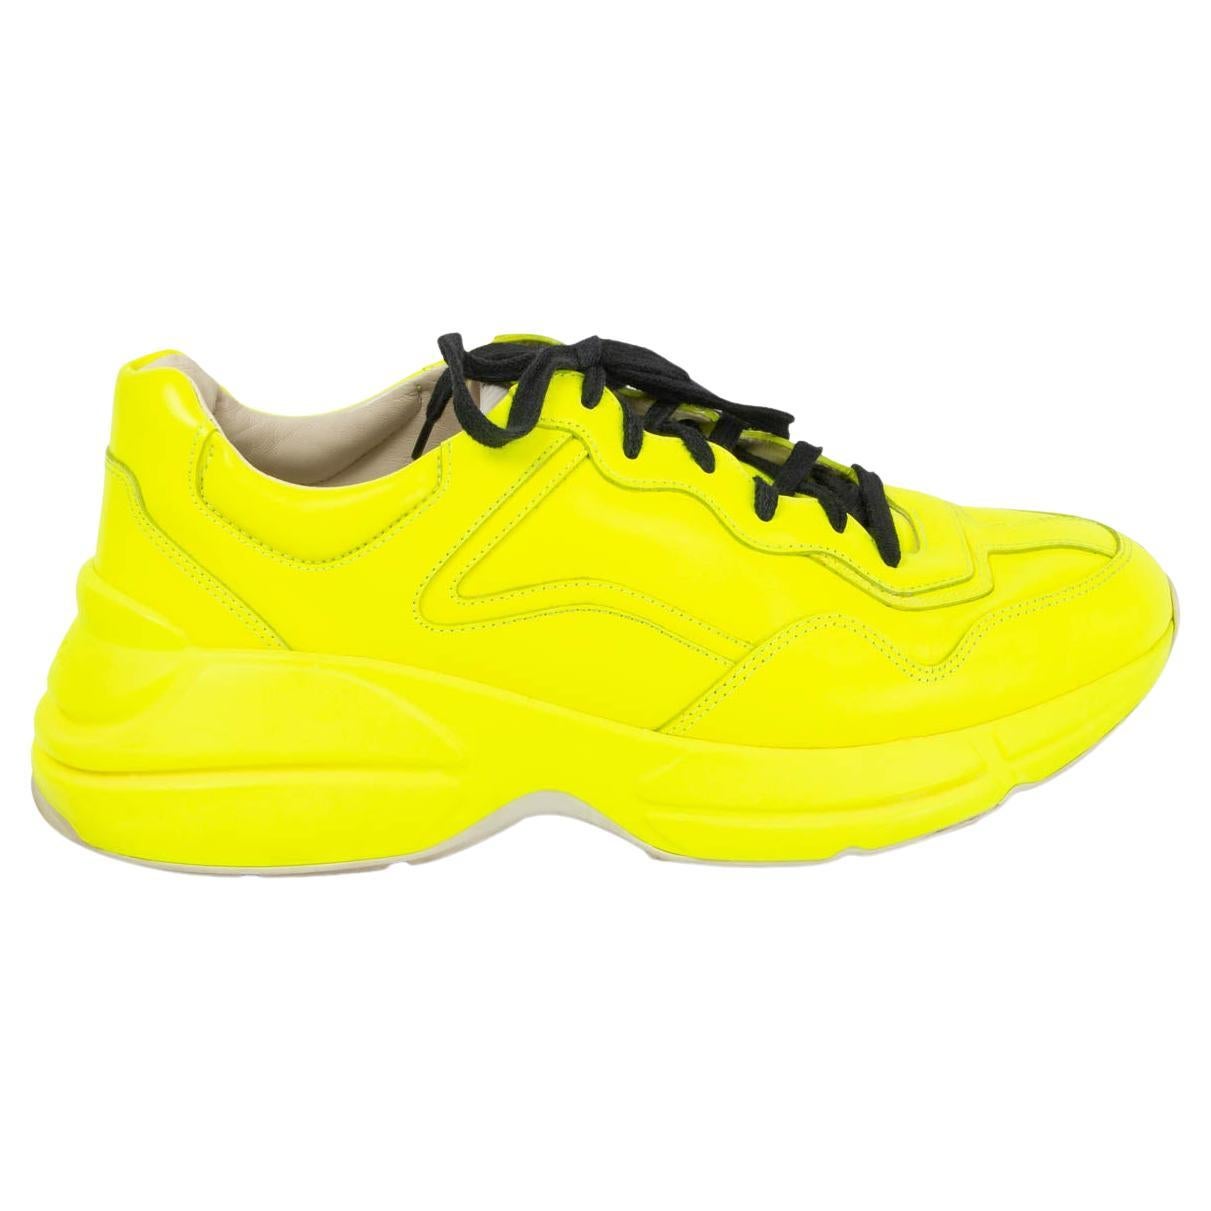 GUCCI neon yellow leather RYTHON Sneakers Shoes 8 42 (mens) or 40 (women) For Sale at 1stDibs neon sneakers, gucci yellow sneakers, gucci rhyton sneakers yellow